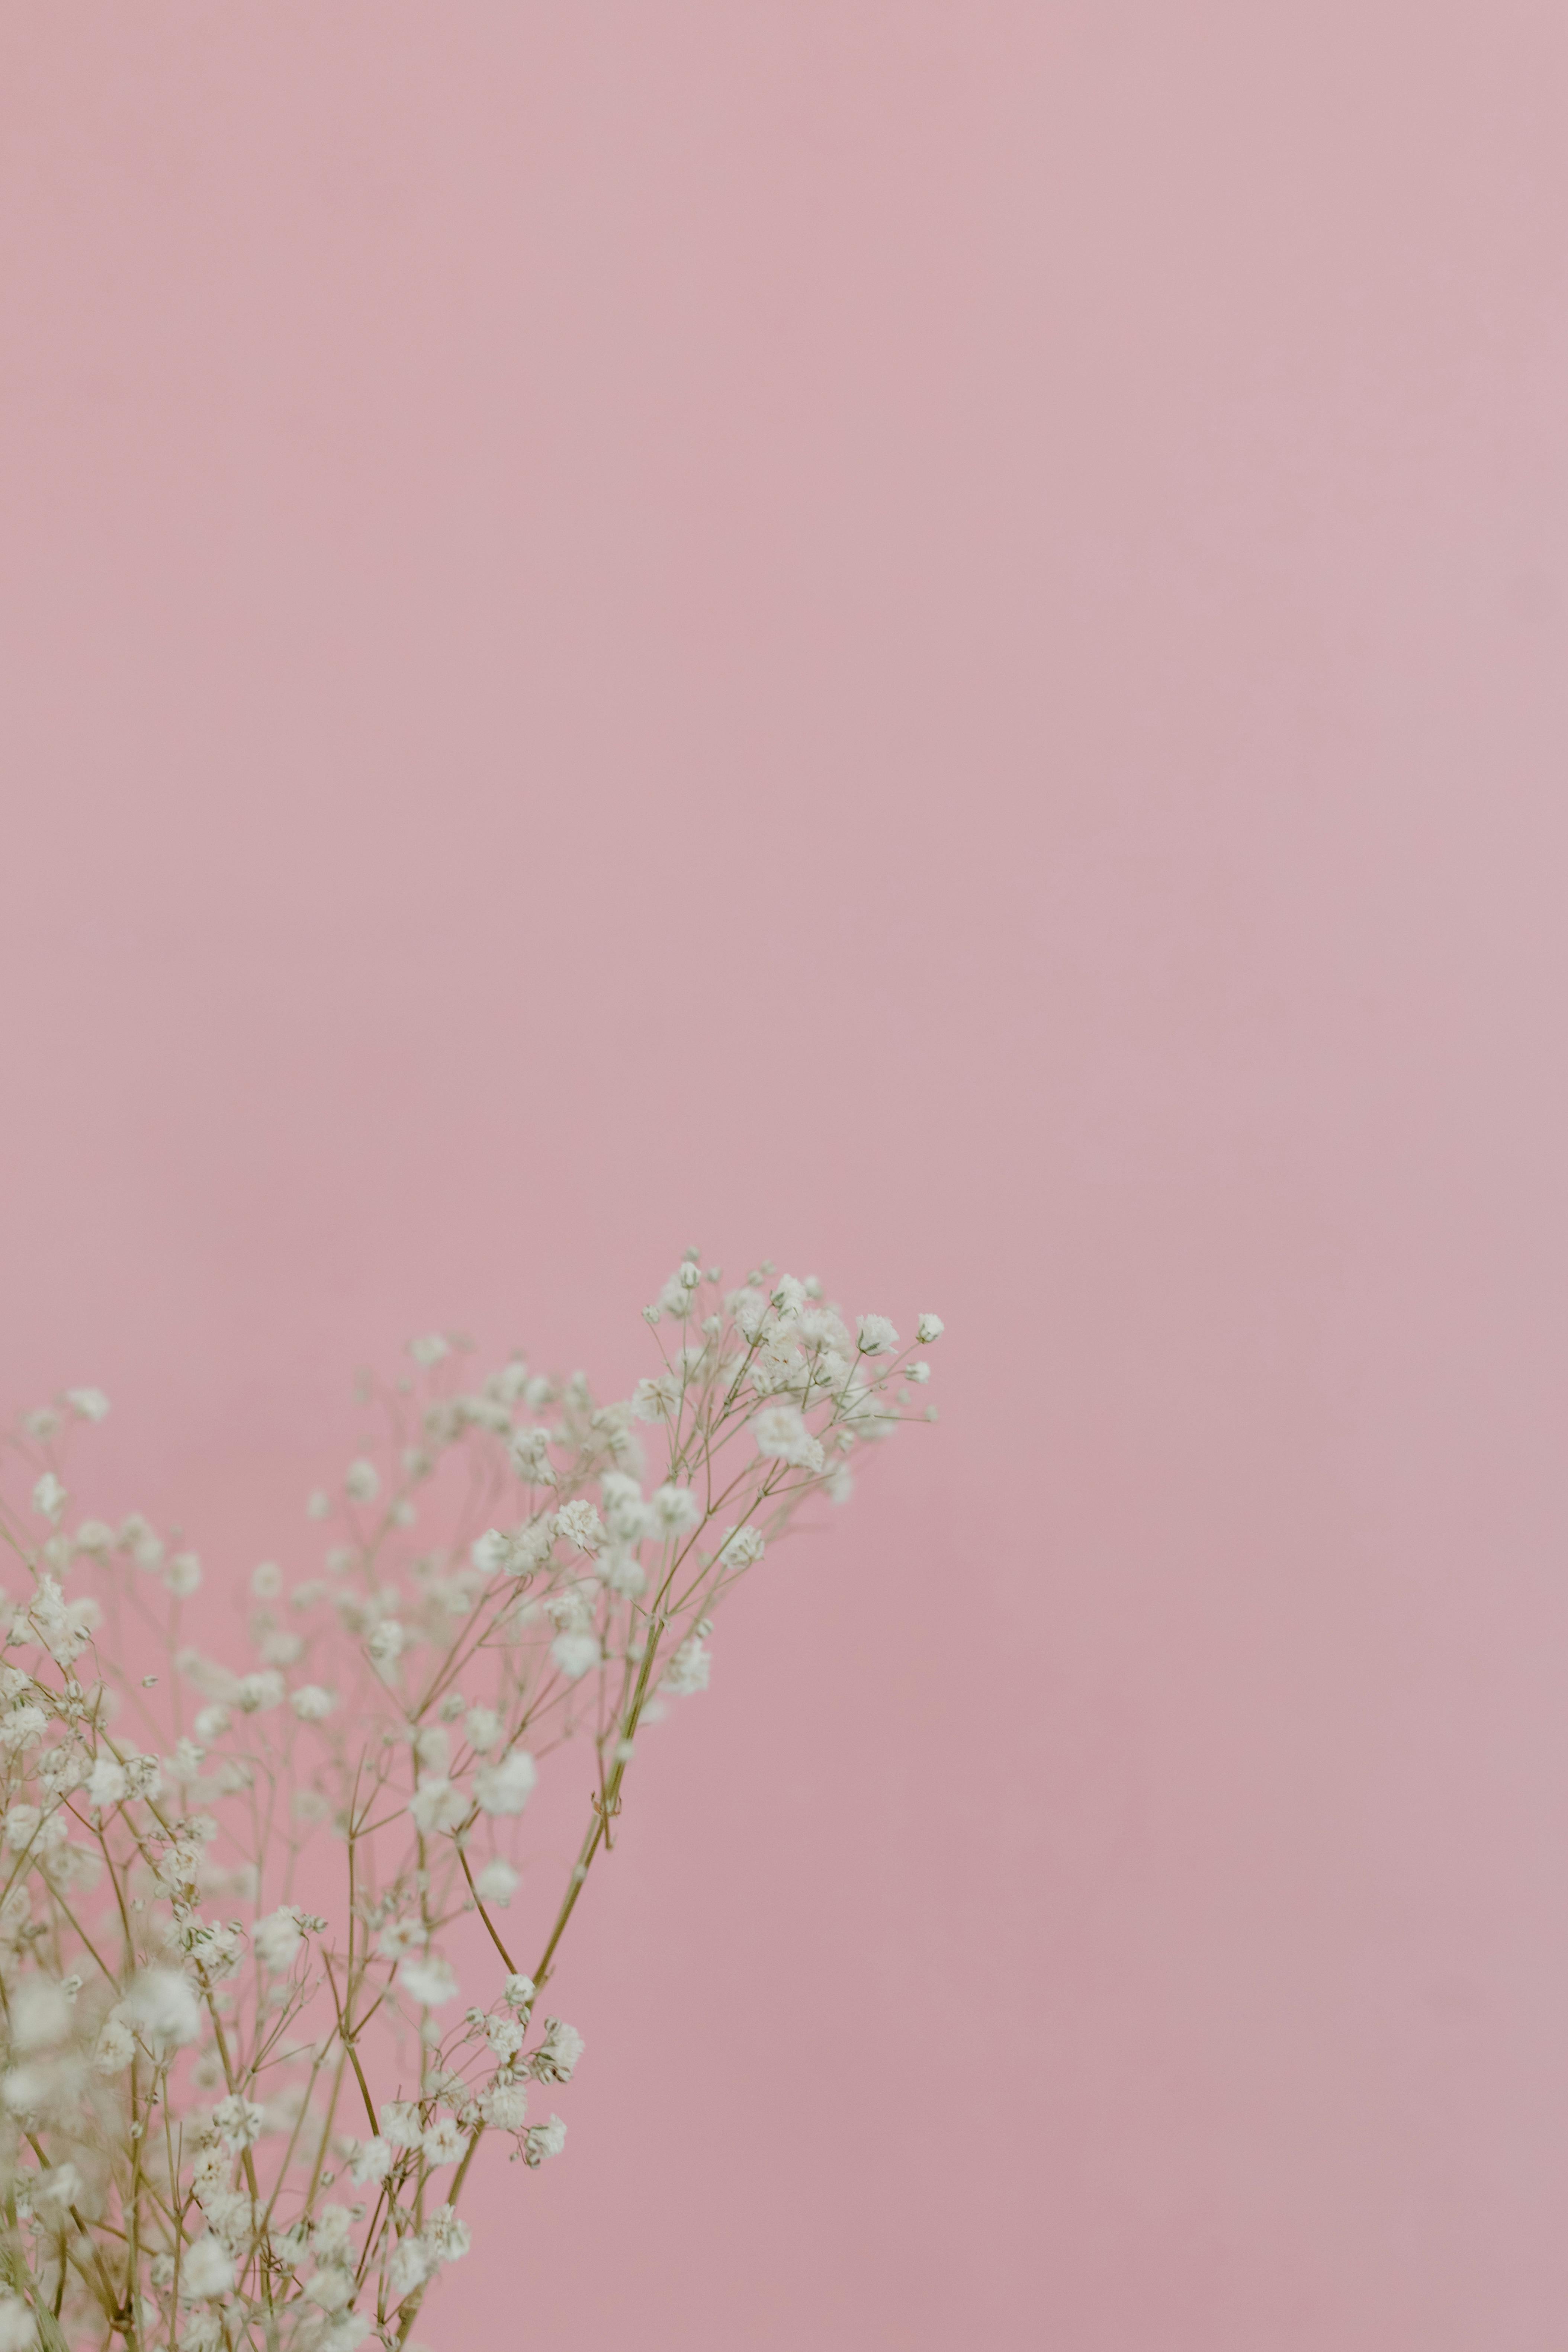 White Flowers with Pink Background · Free Stock Photo